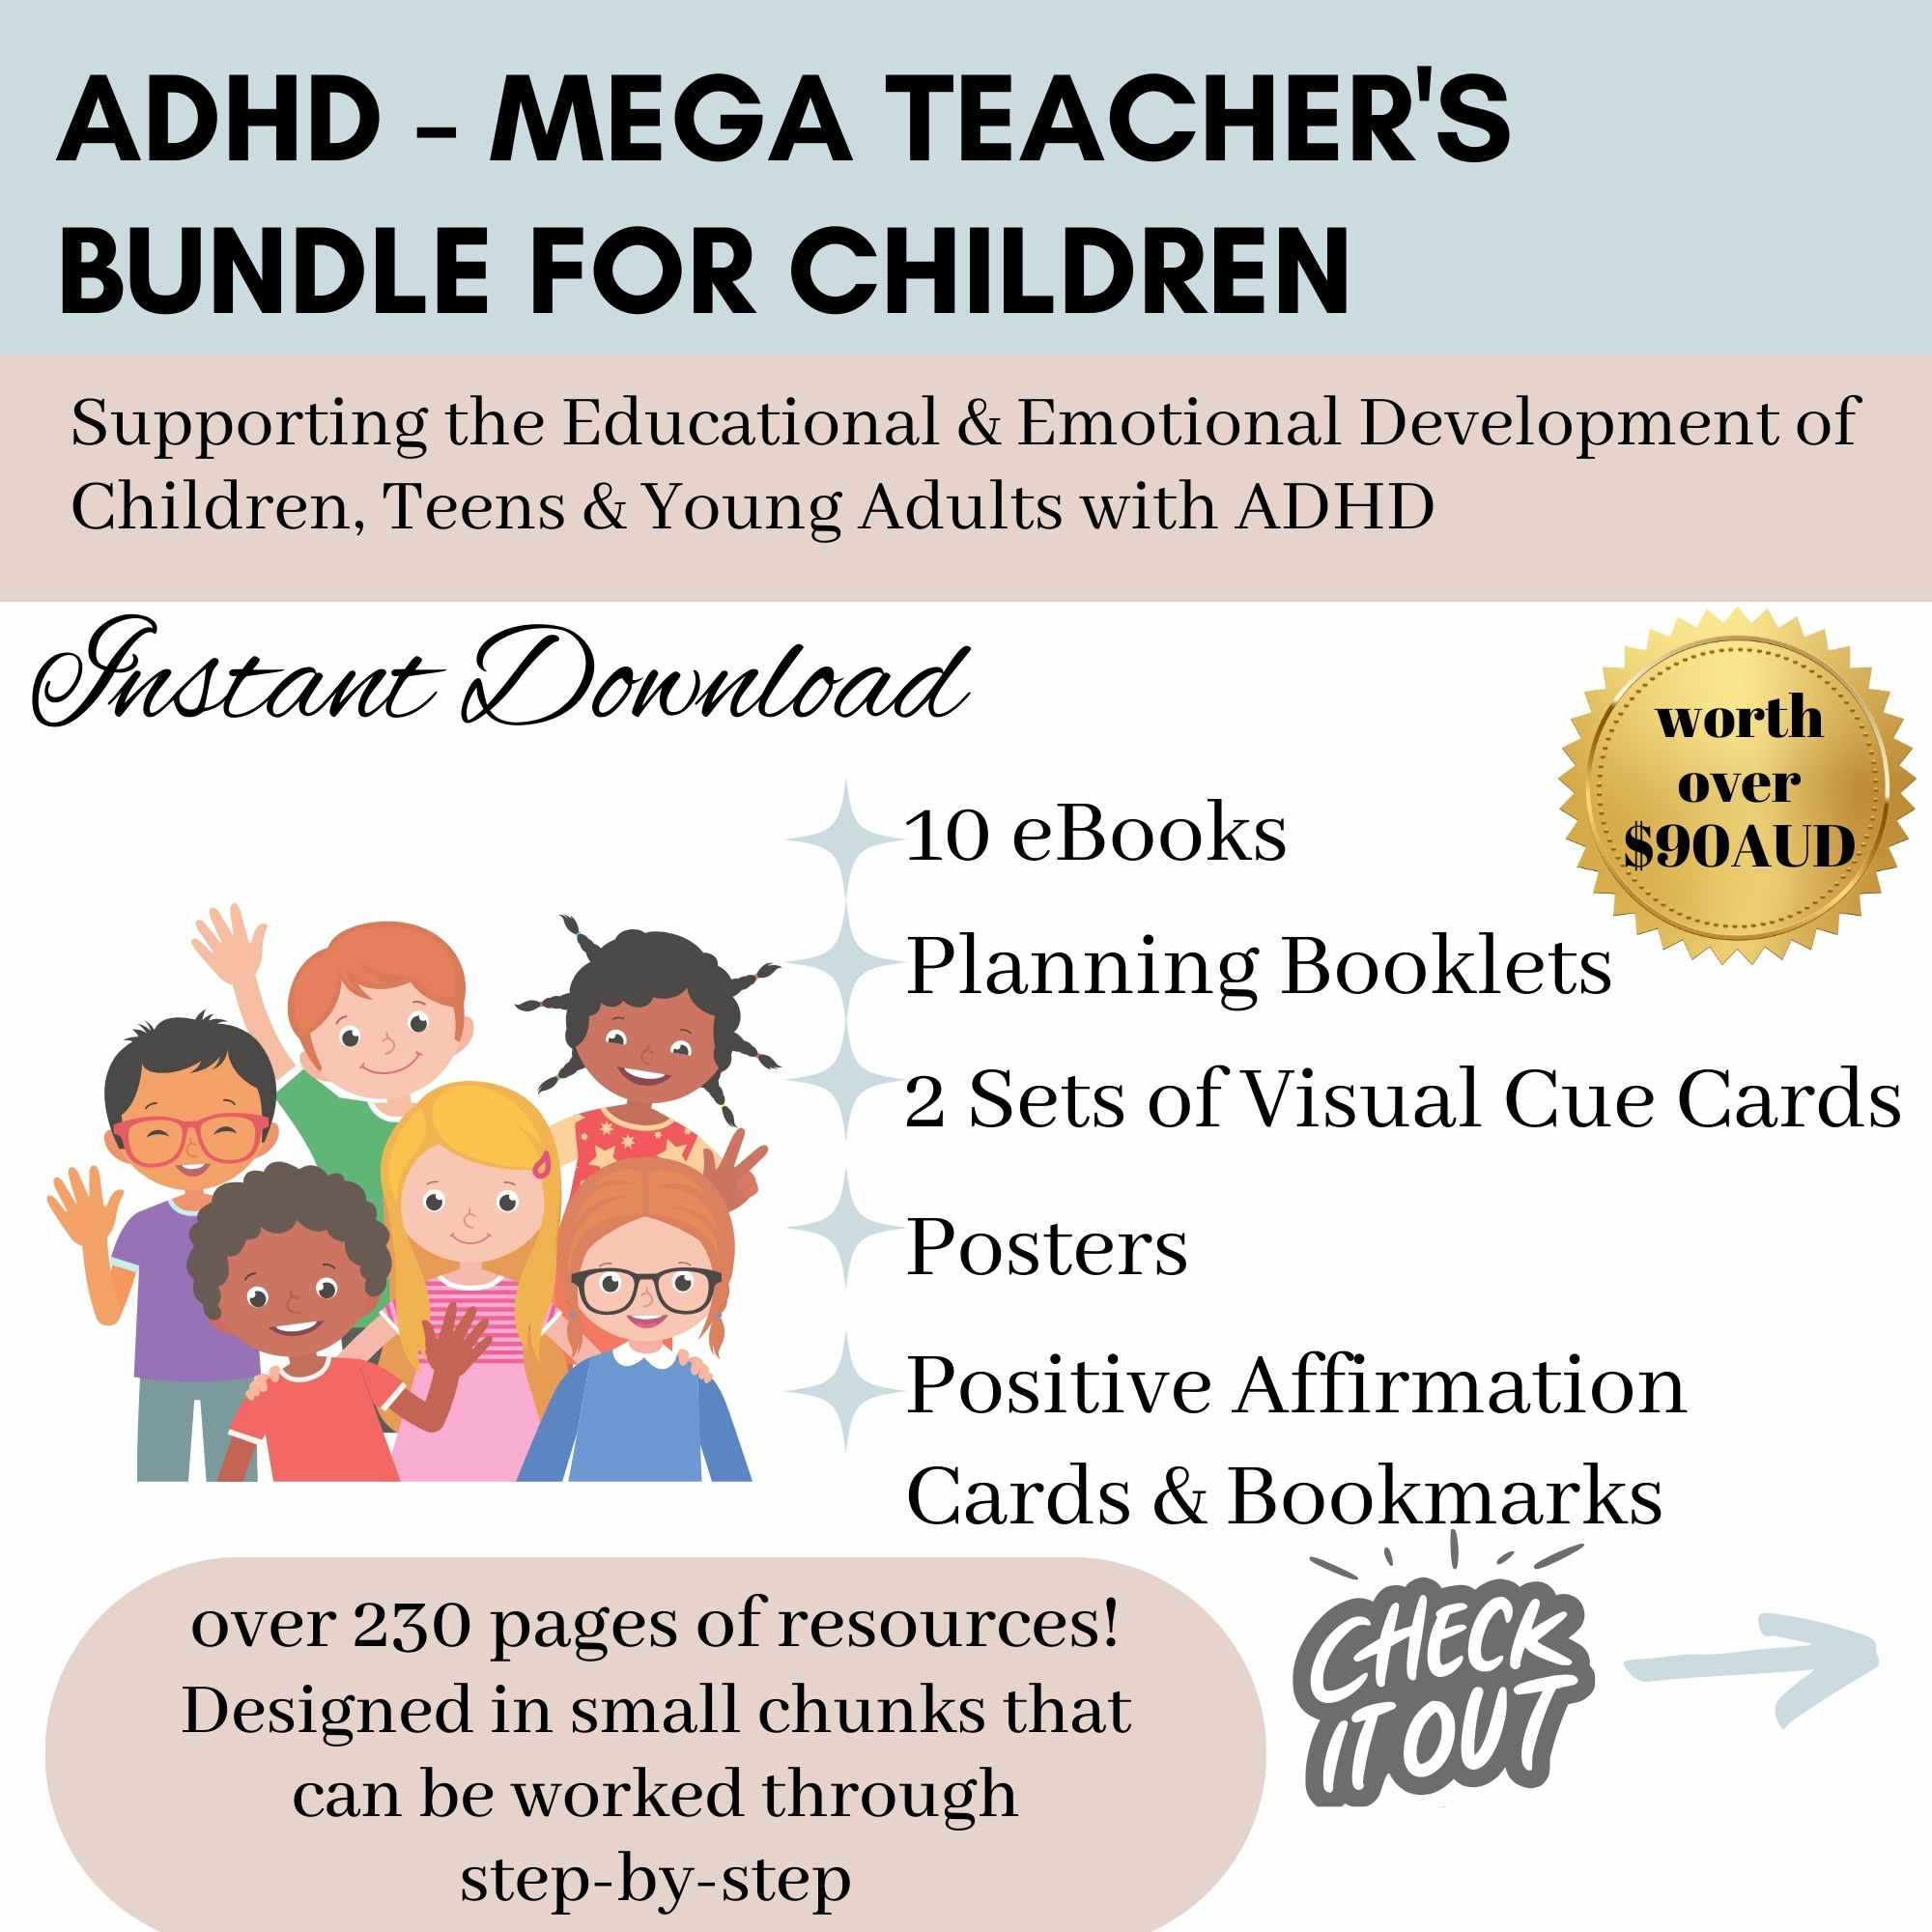 ADHD Teacher's Mega Bundle of Resources on Etsy by Gutidentity